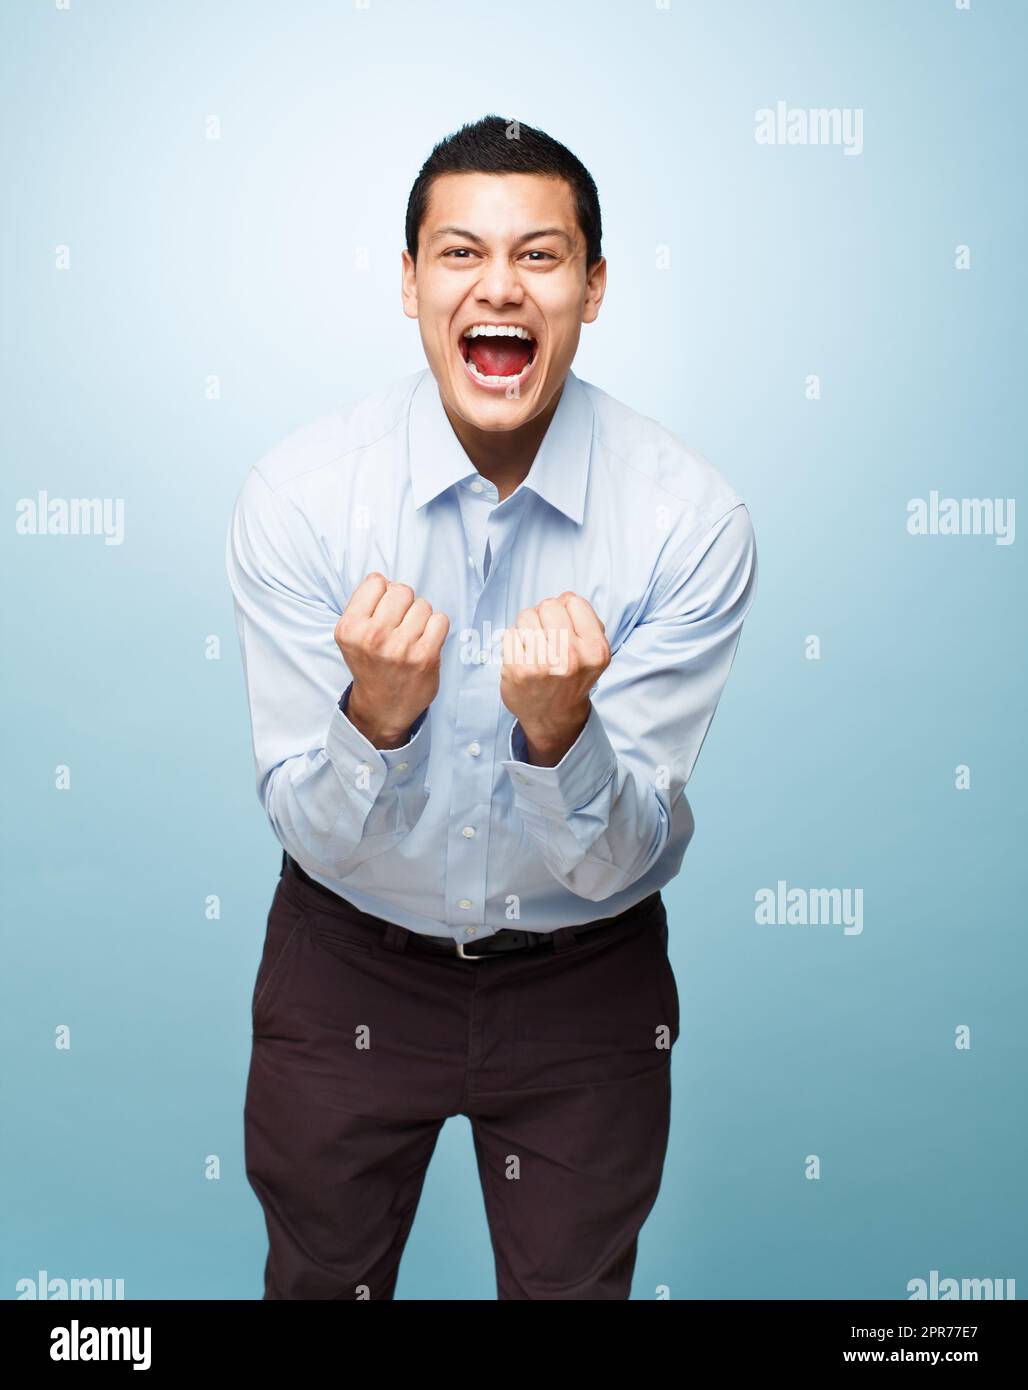 Express your excitement about life. Shot of a young man shouting in joy against a studio background. Stock Photo